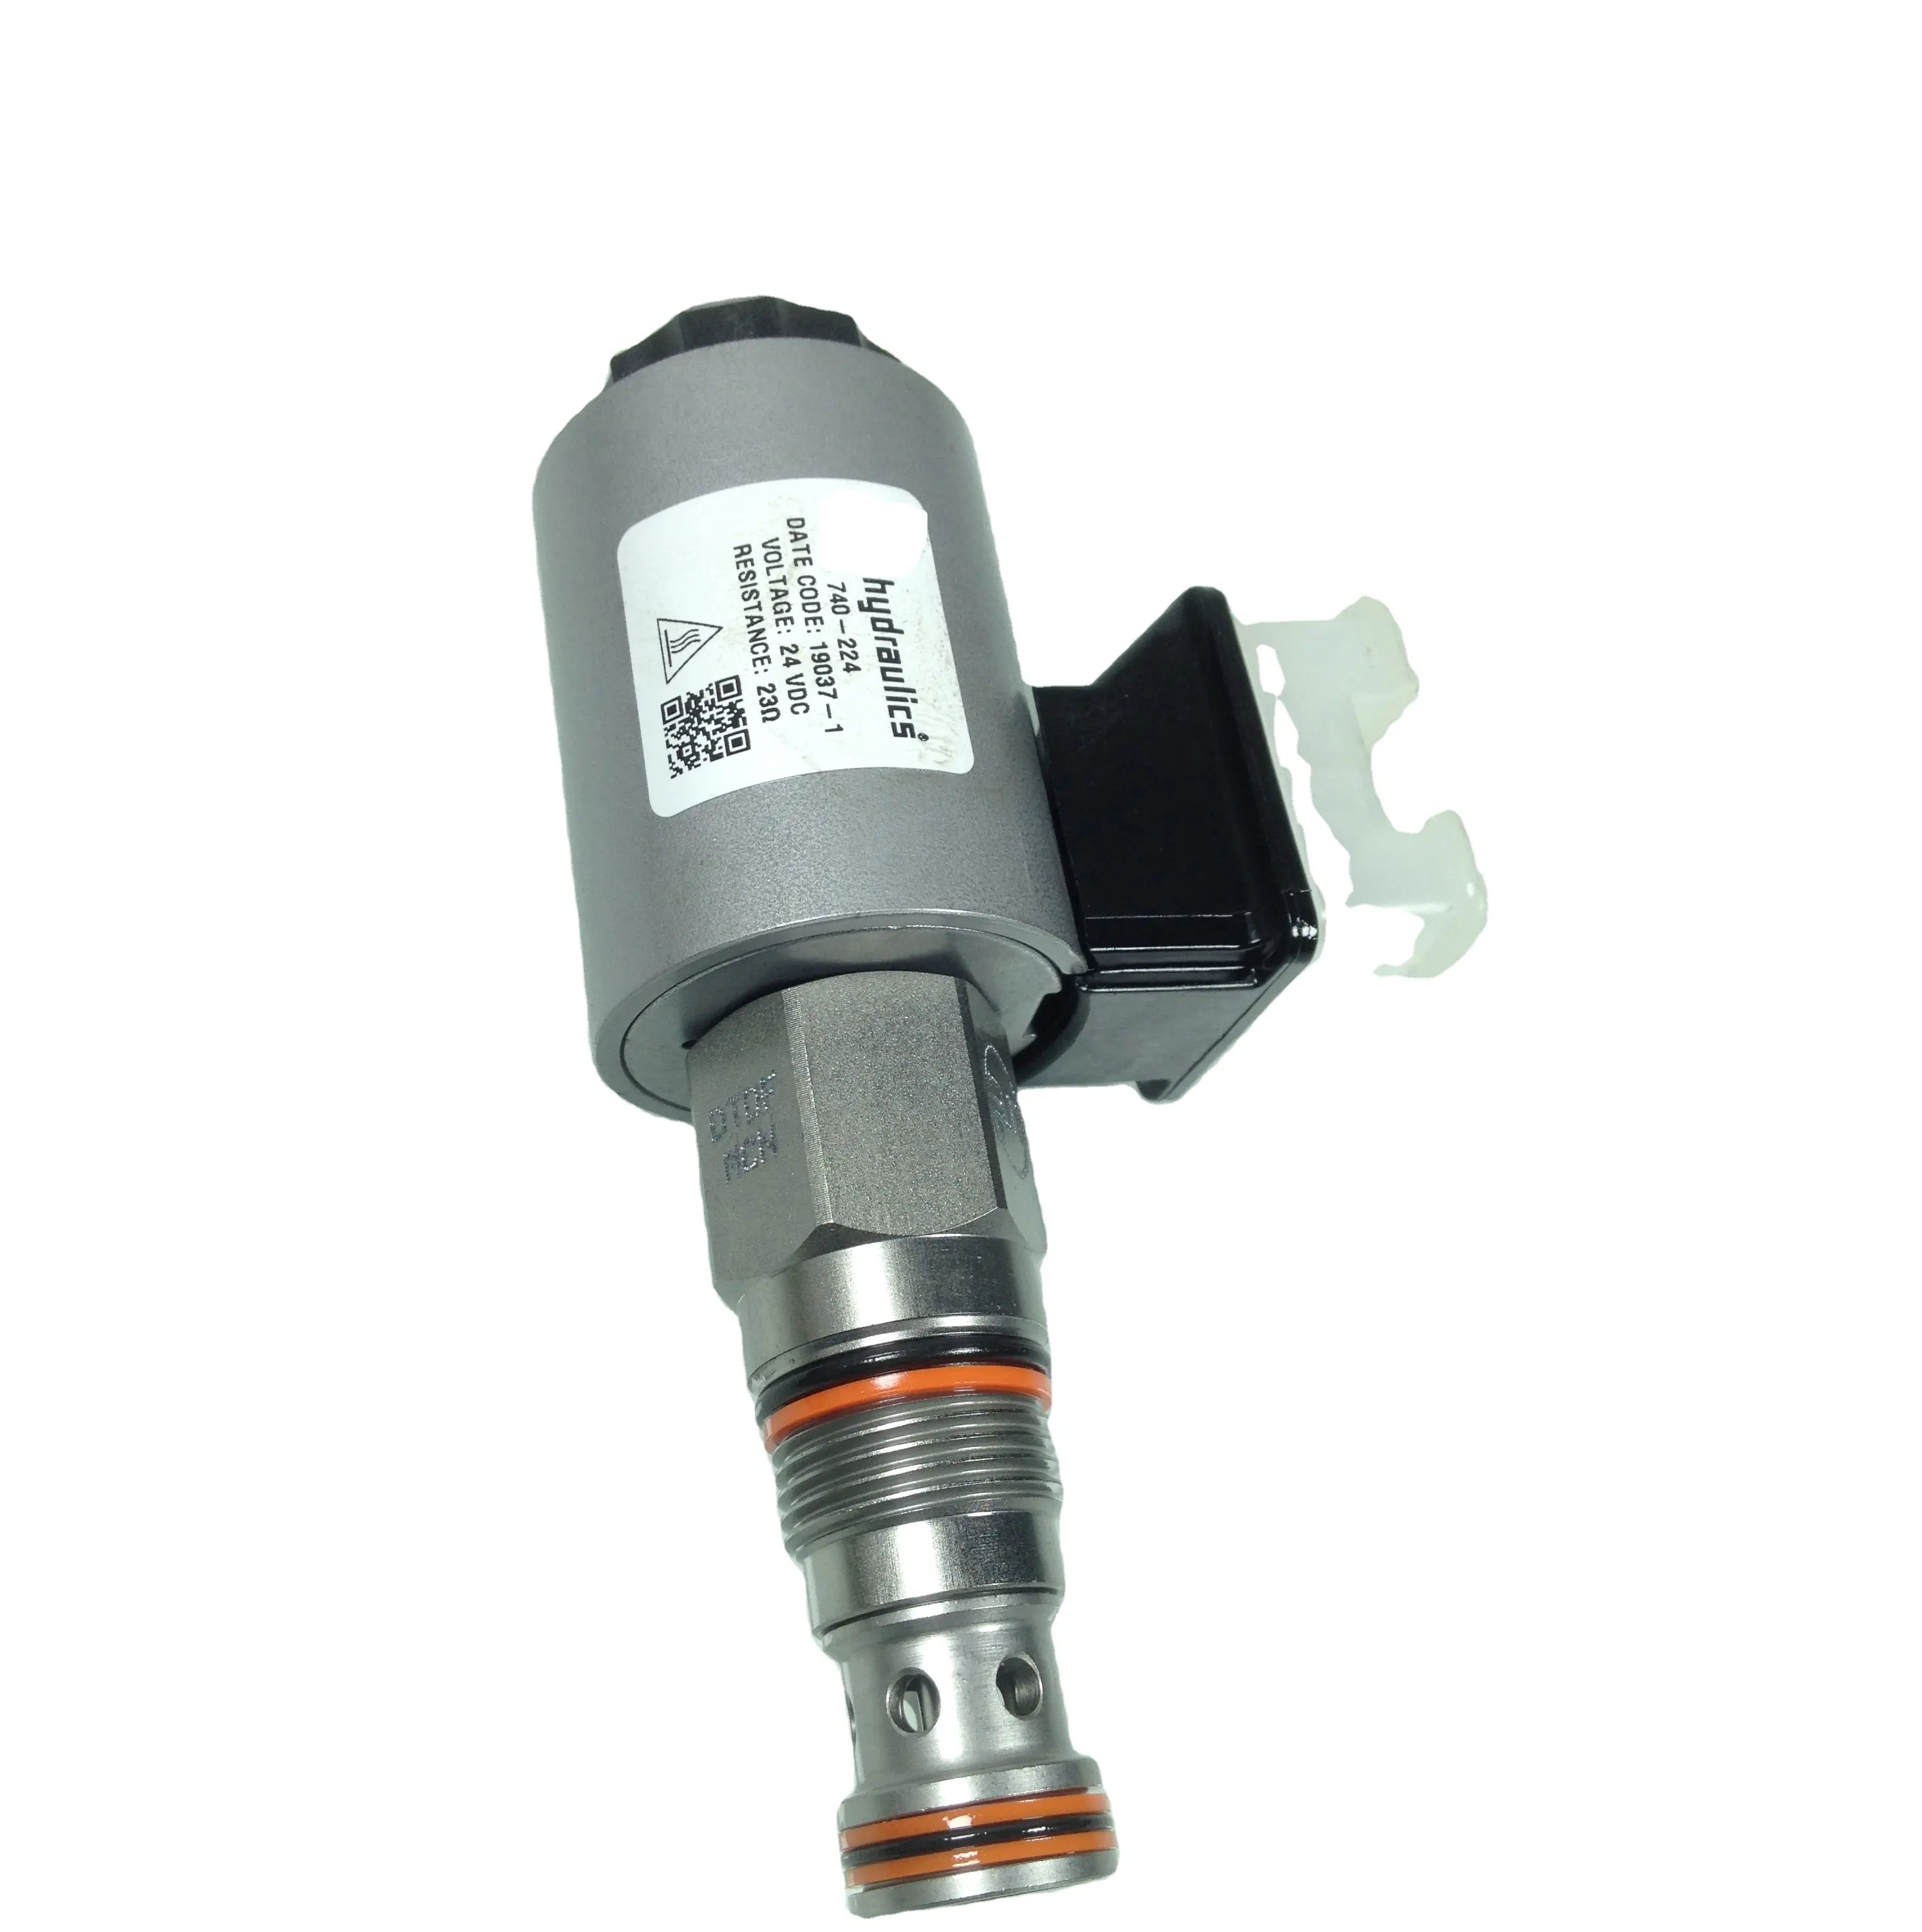 Poppet Normally closed 2 Position 2 Way Solenoid leakless Double Lock DTDFXCN High Pressure Threaded cartridge hydraulic valve